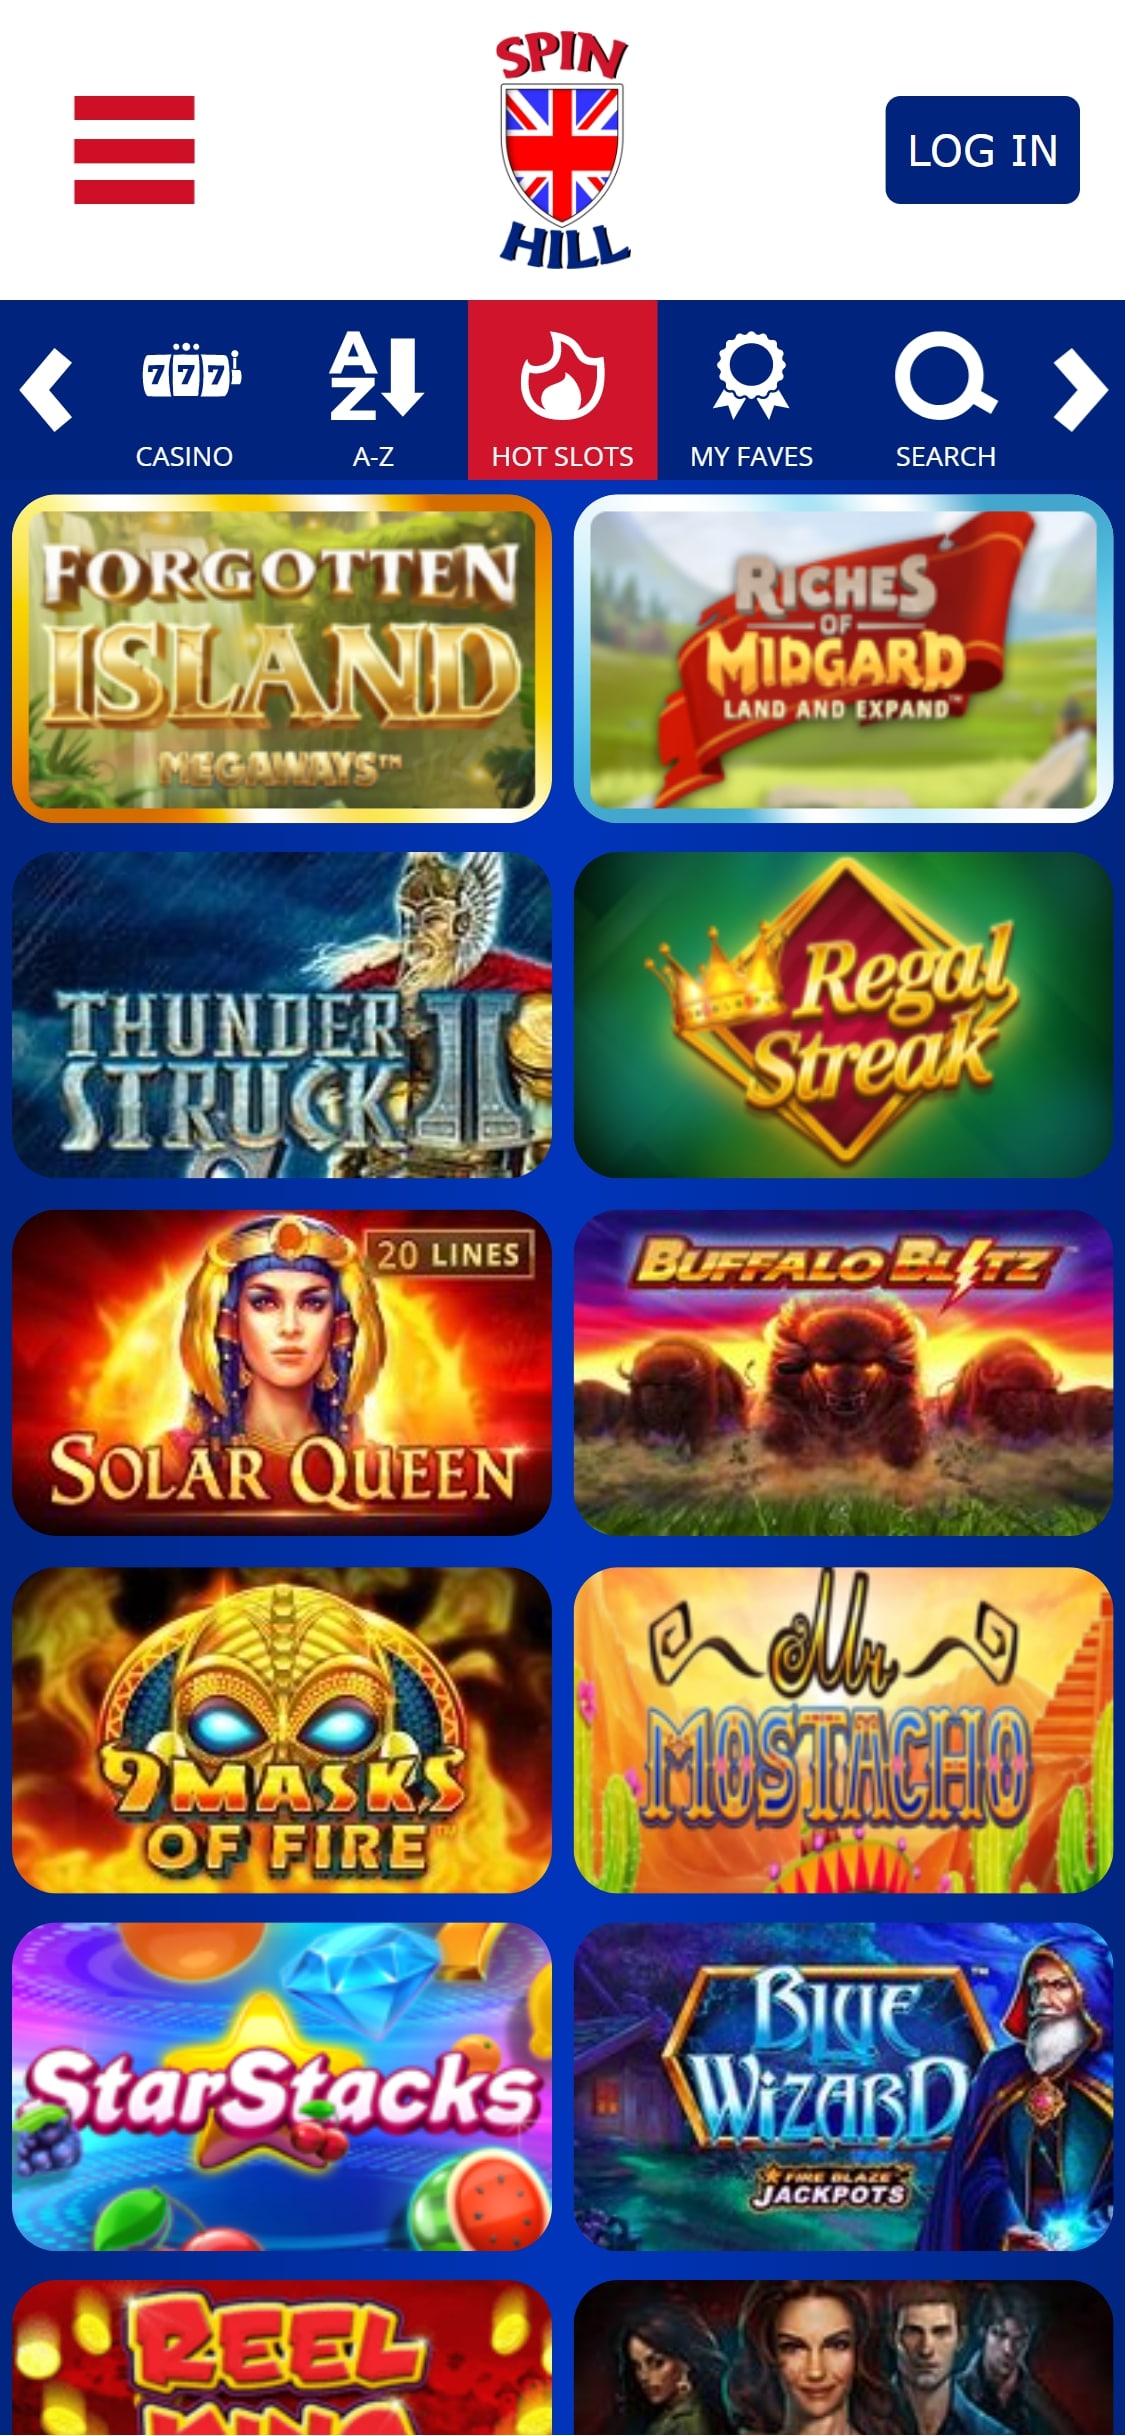 Spin Hill Casino Mobile Games Review